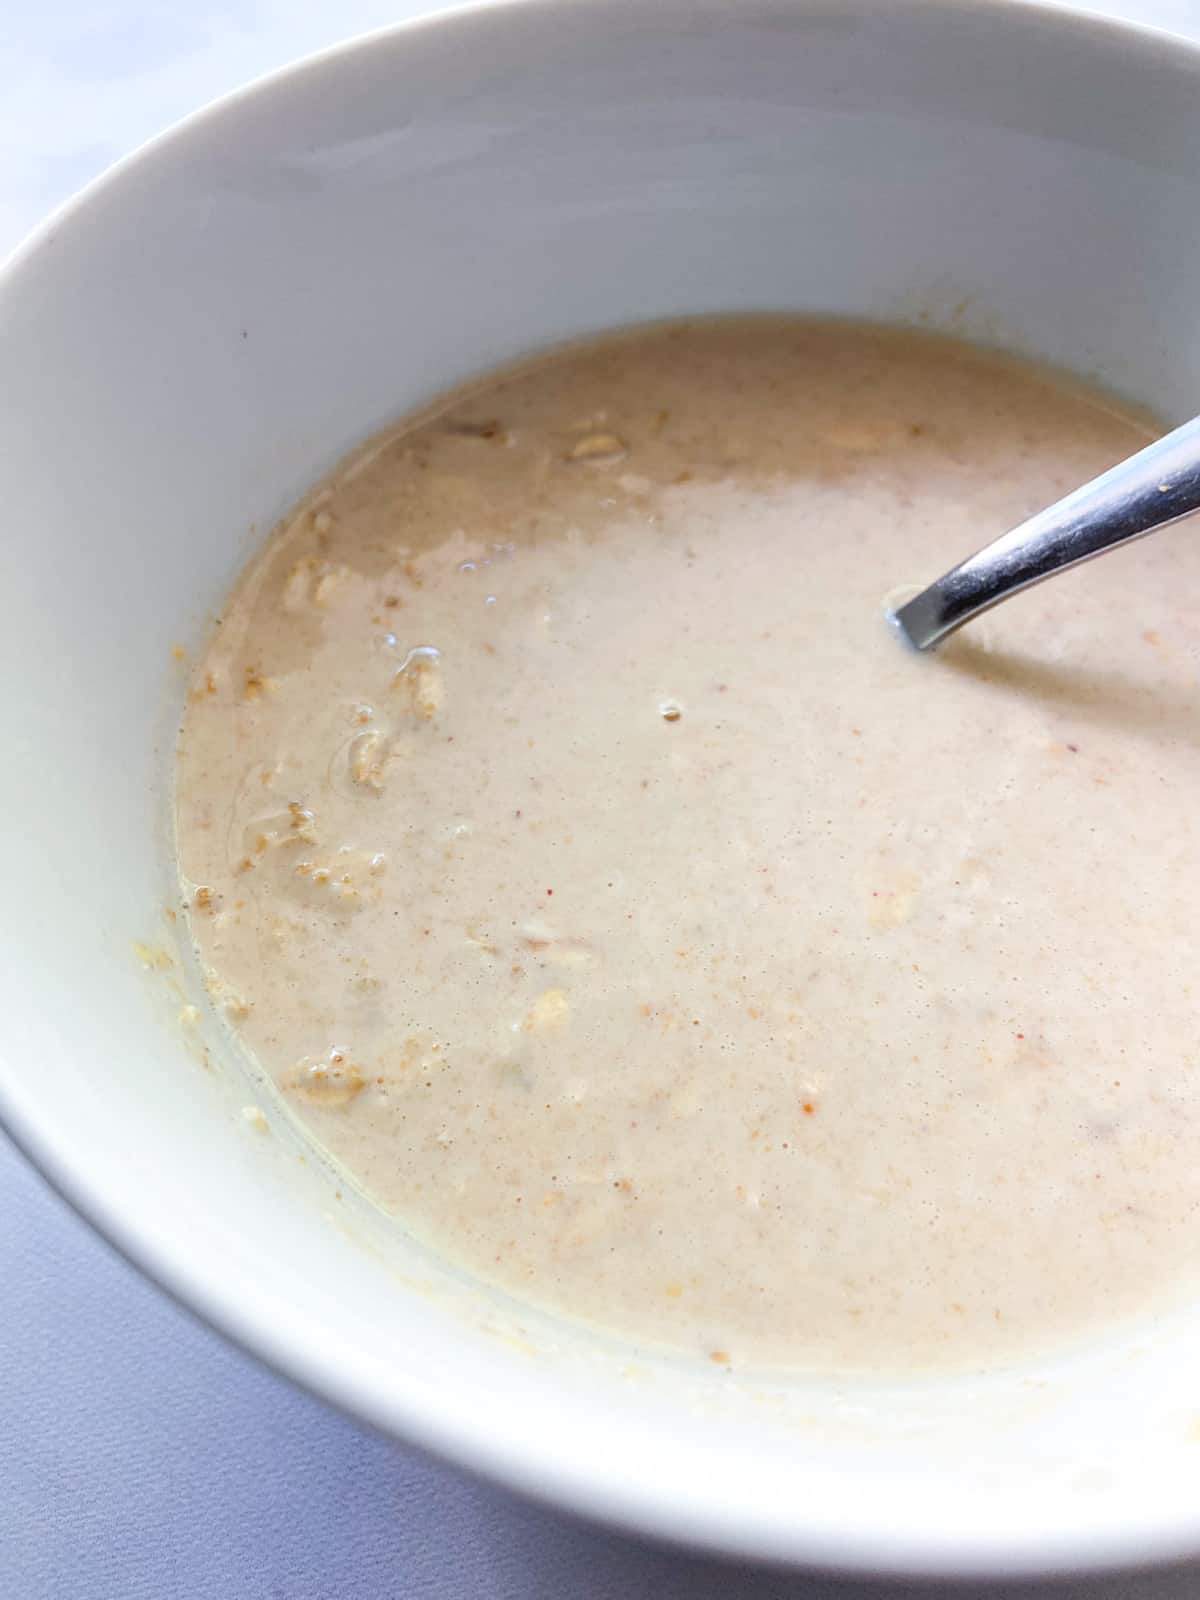 The overnight oats mixture in a bowl with a spoon.